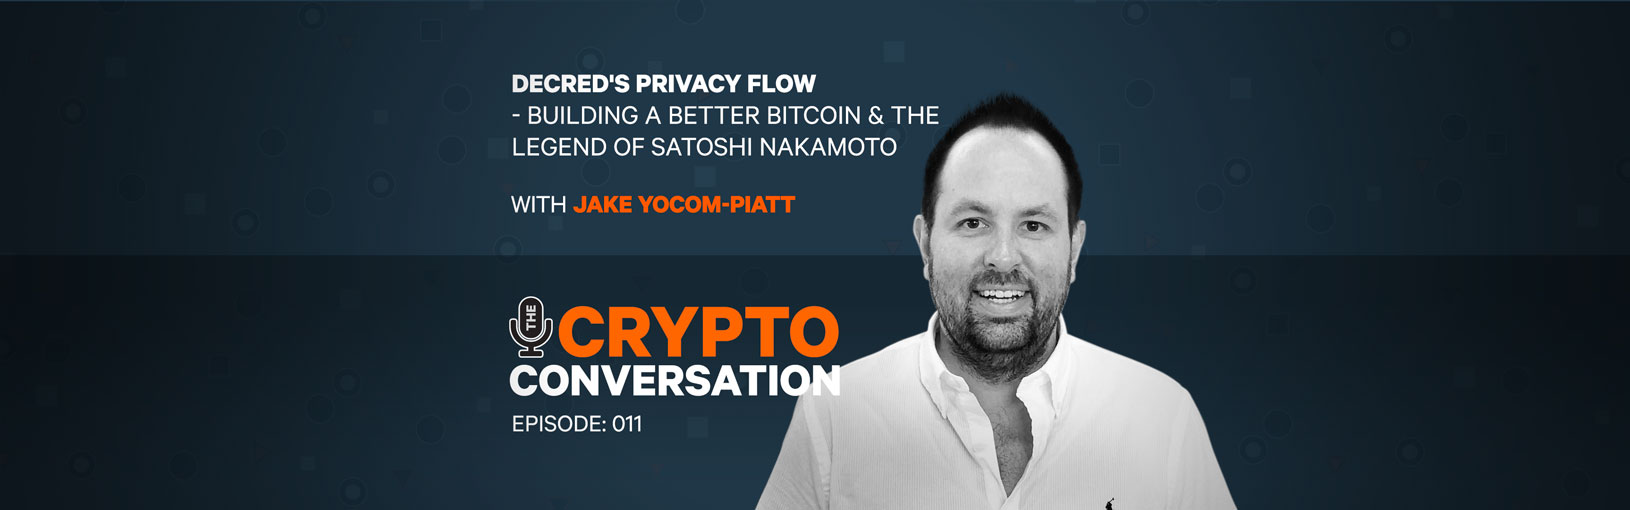 Decred’s Privacy Flow – Building a better Bitcoin & the legend of Satoshi Nakamoto